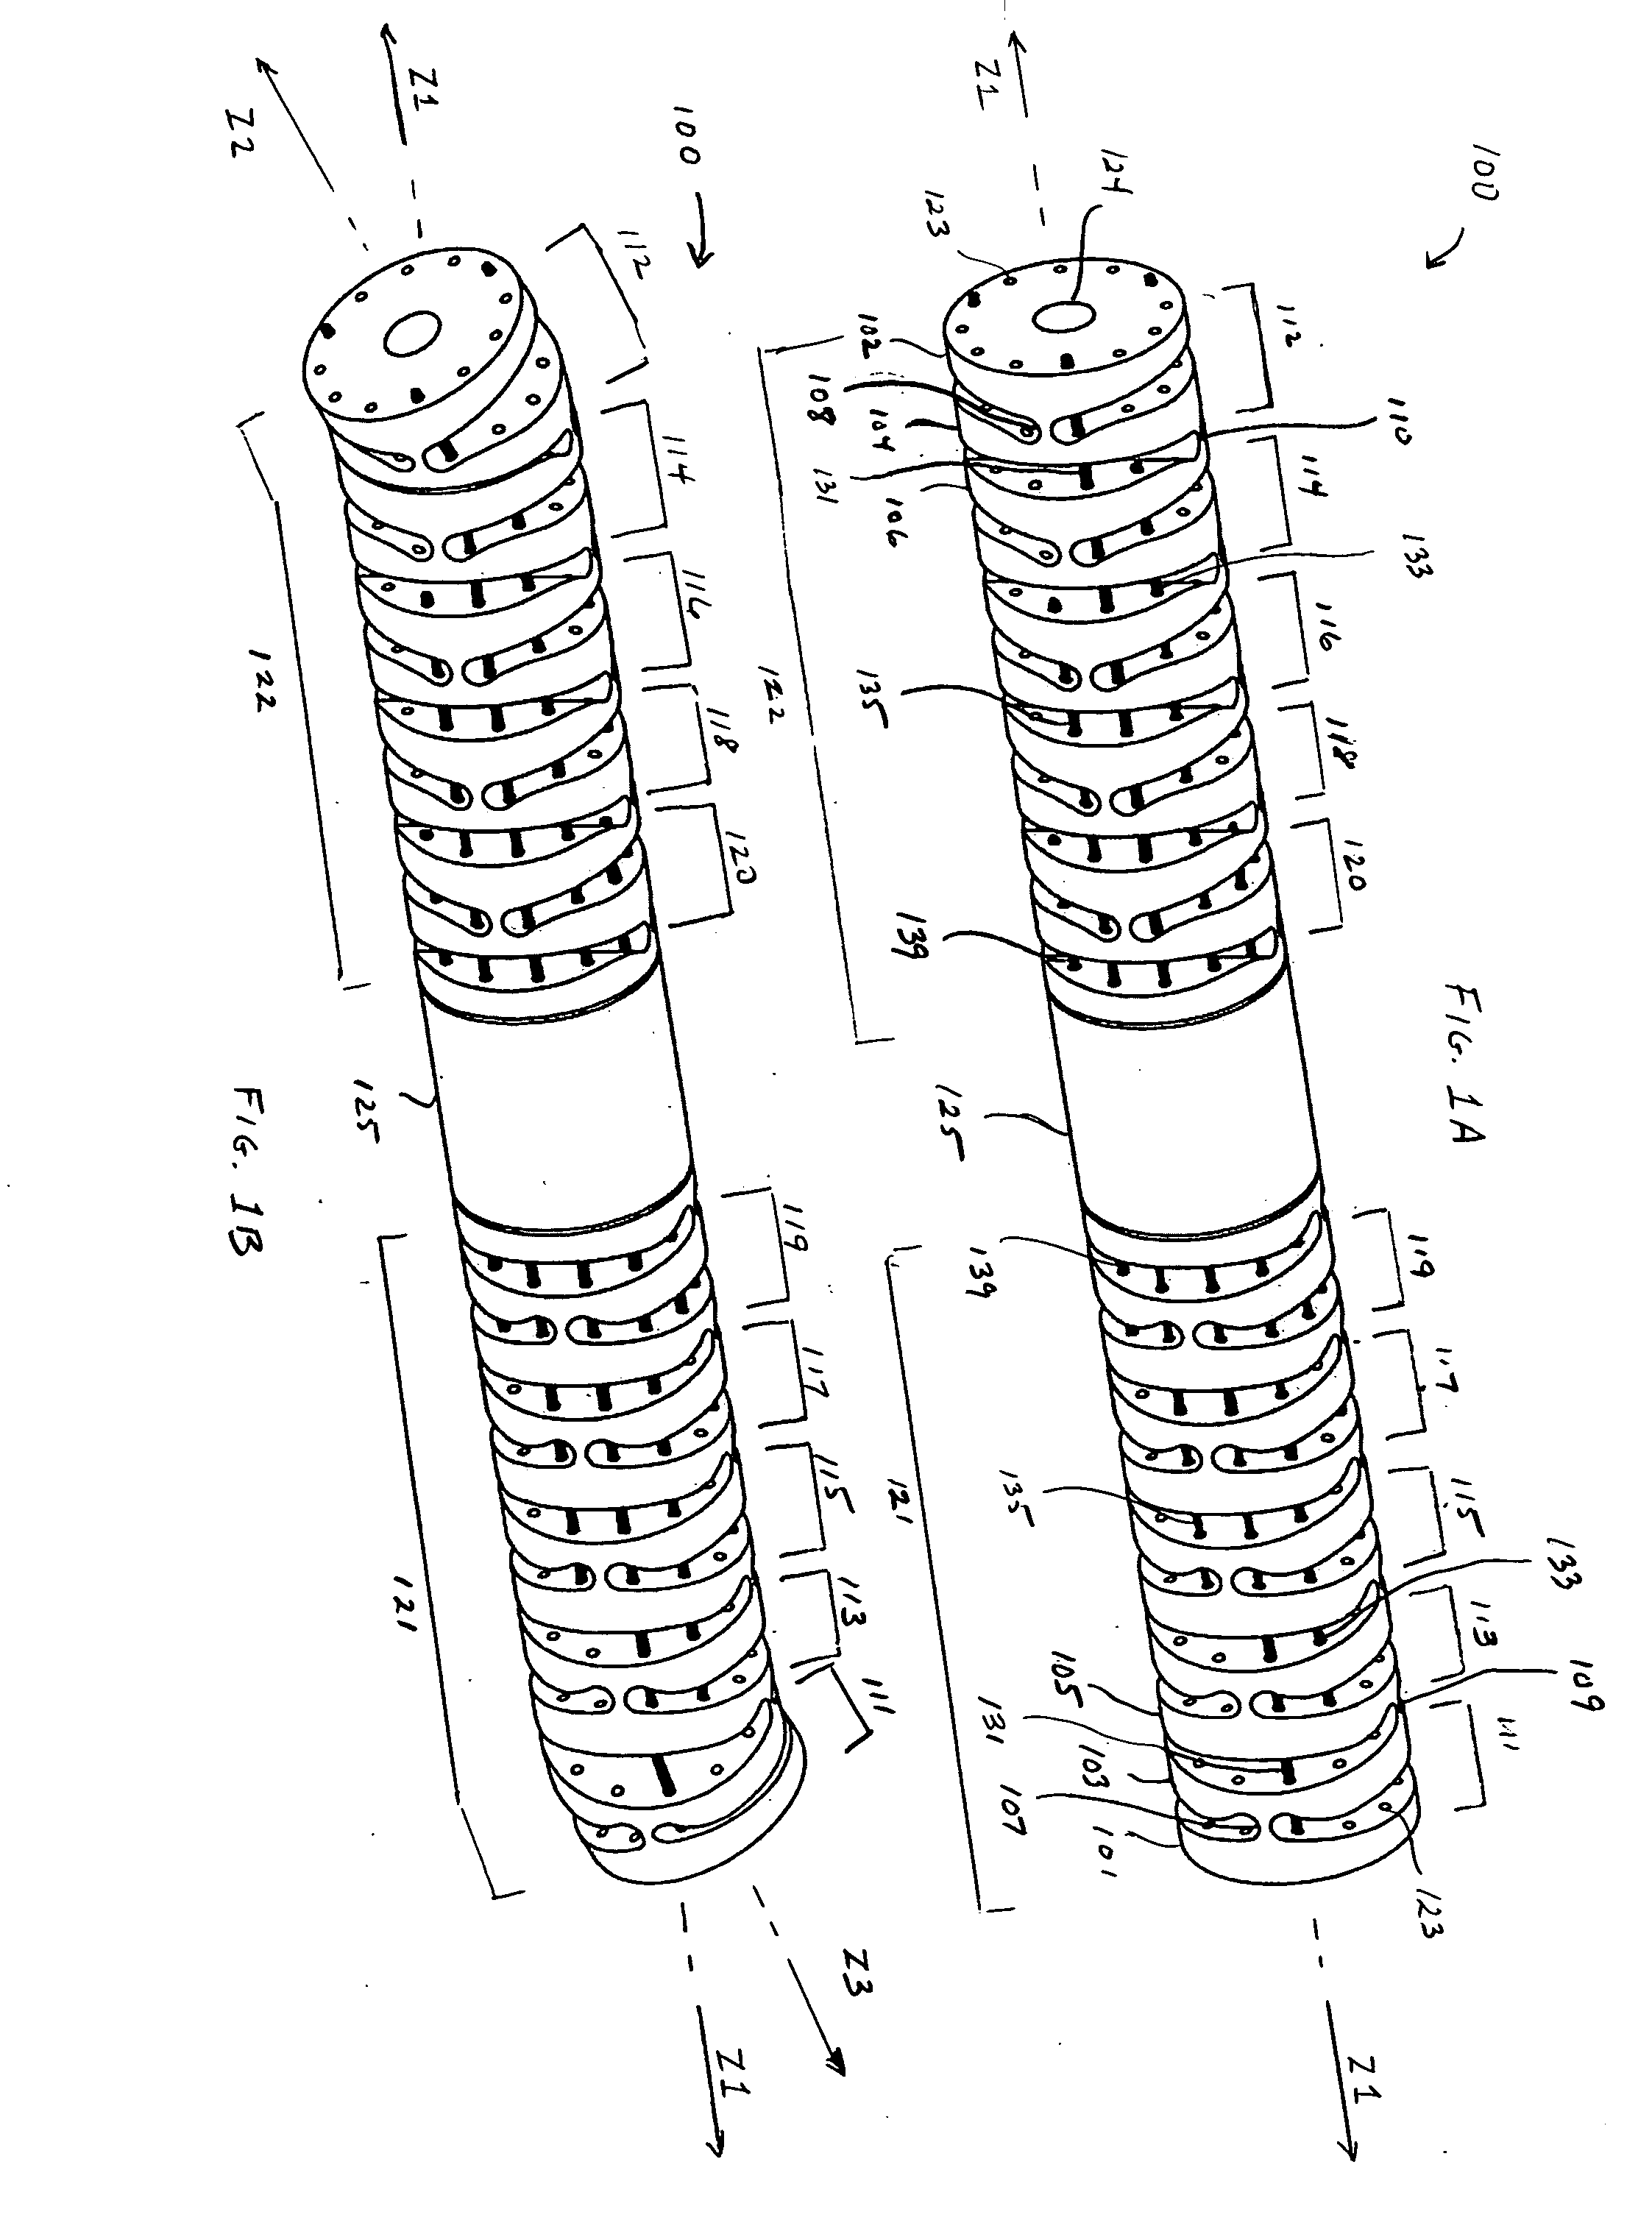 Articulating mechanism with flex-hinged links